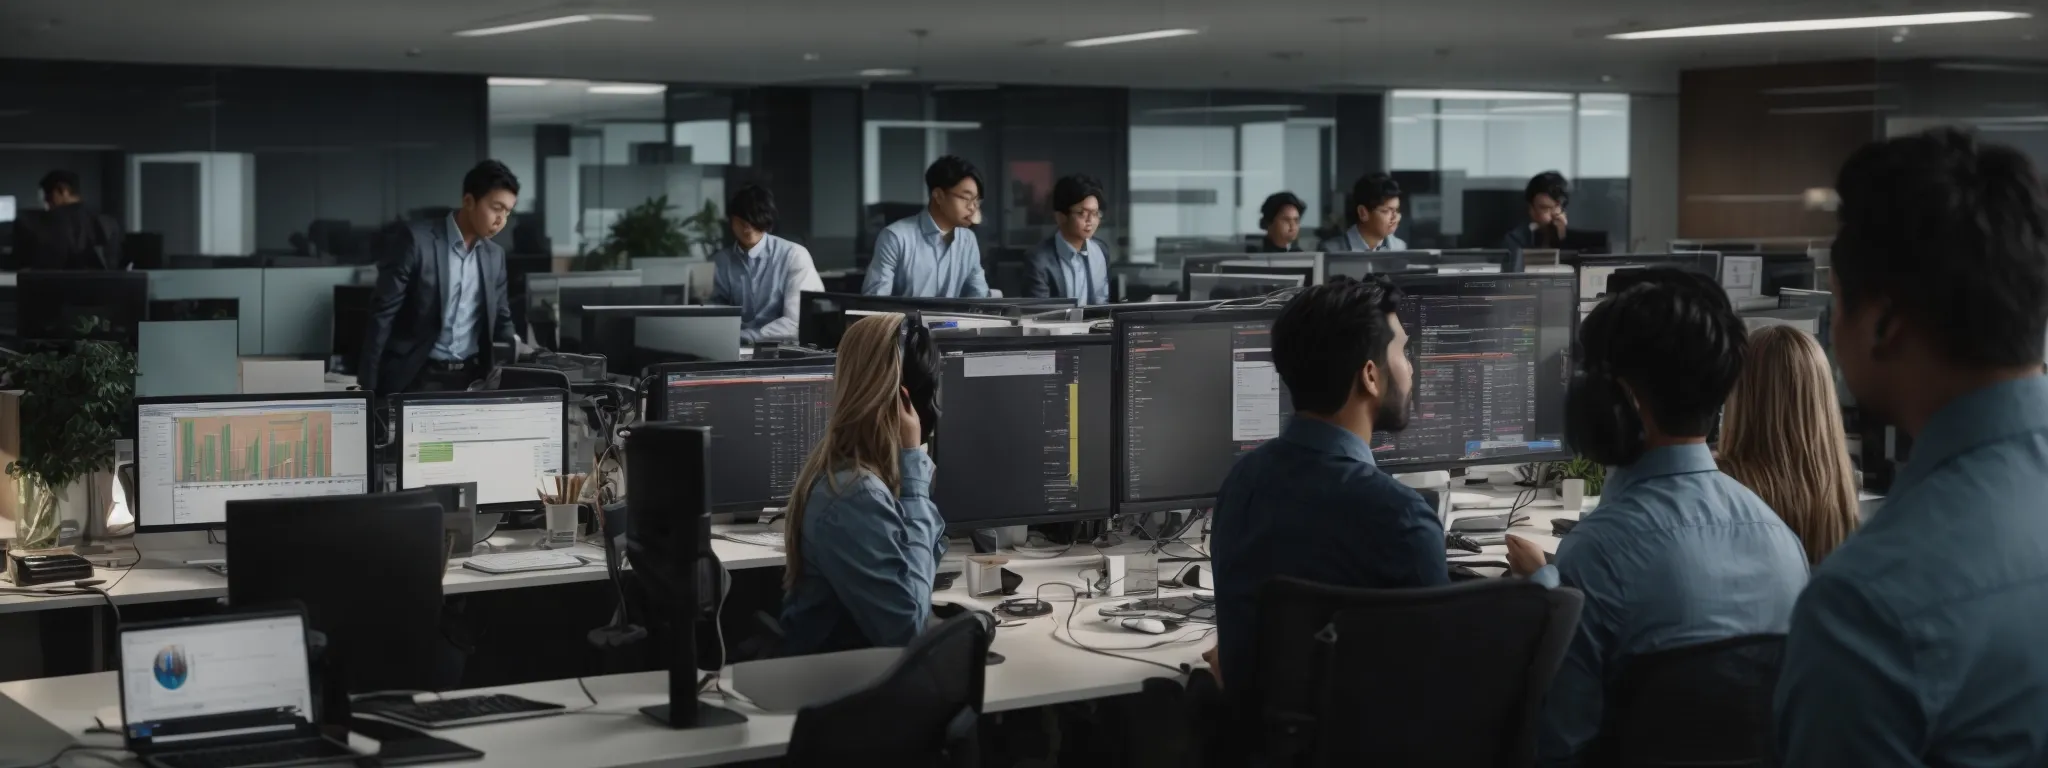 a bustling digital marketing team analyzing data and strategies around a computer screen in a modern office.